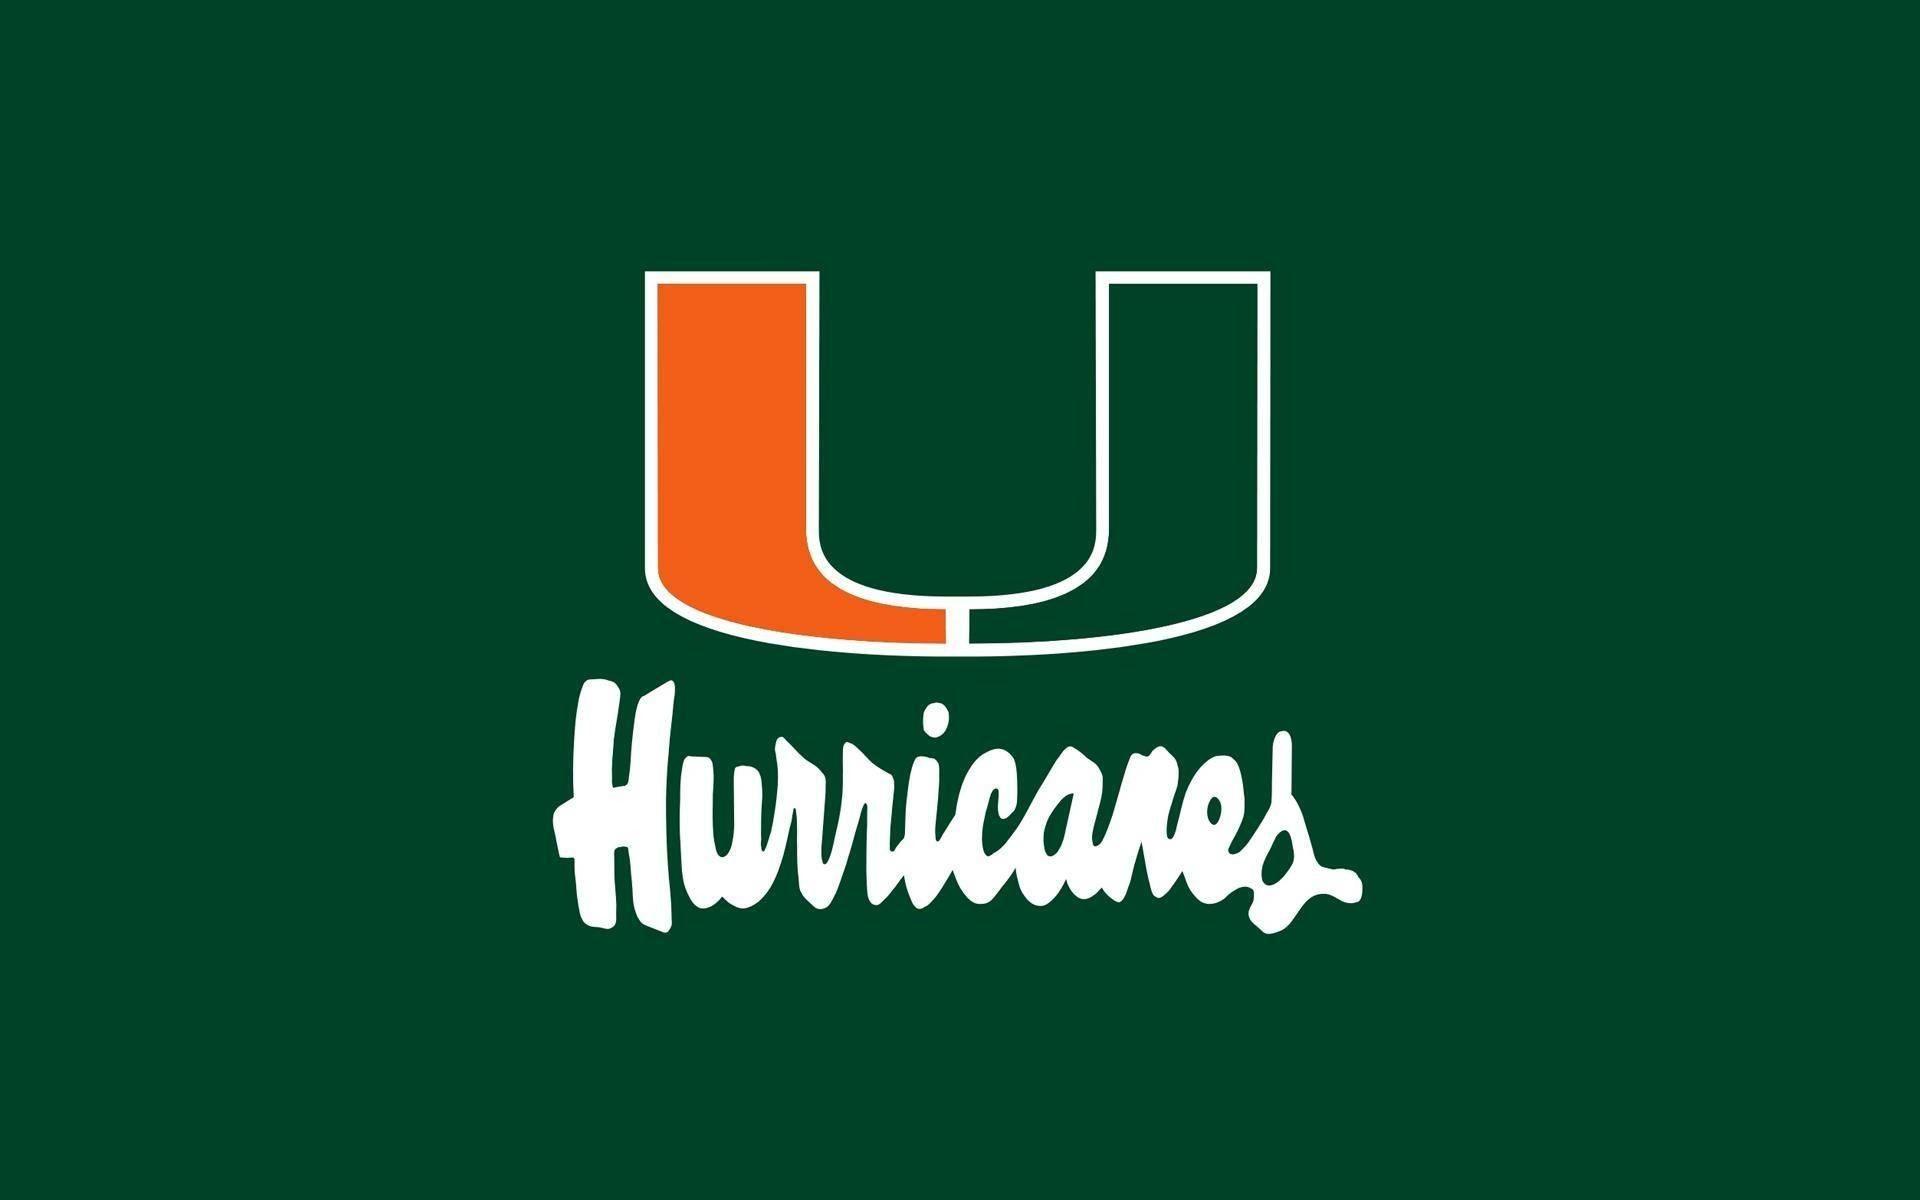 Miami Hurricanes Wallpapers - Top Free